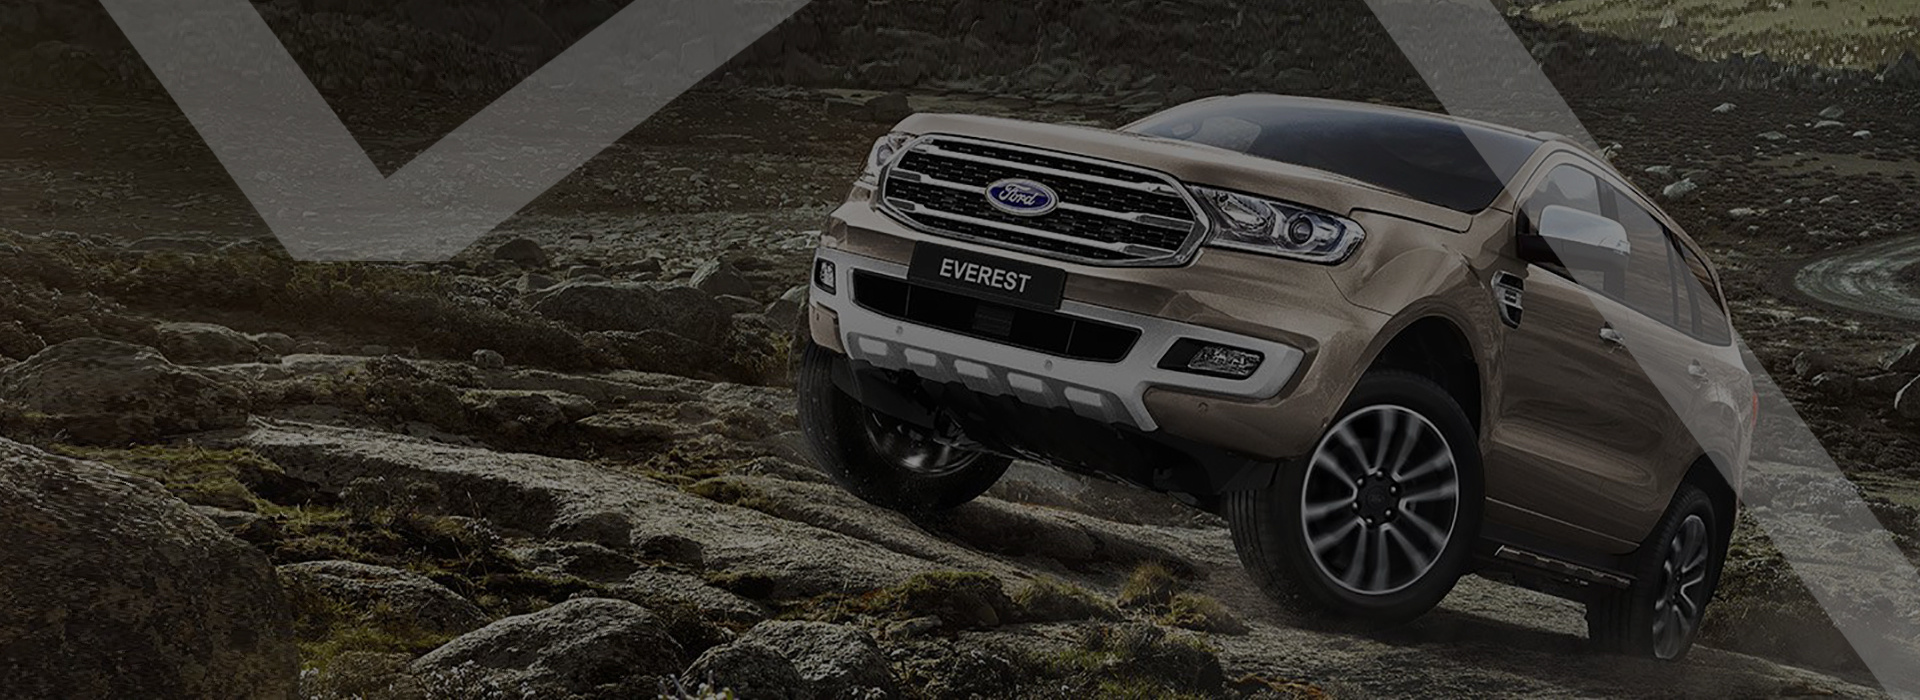 Maxxia Marketplace - Ford Everest